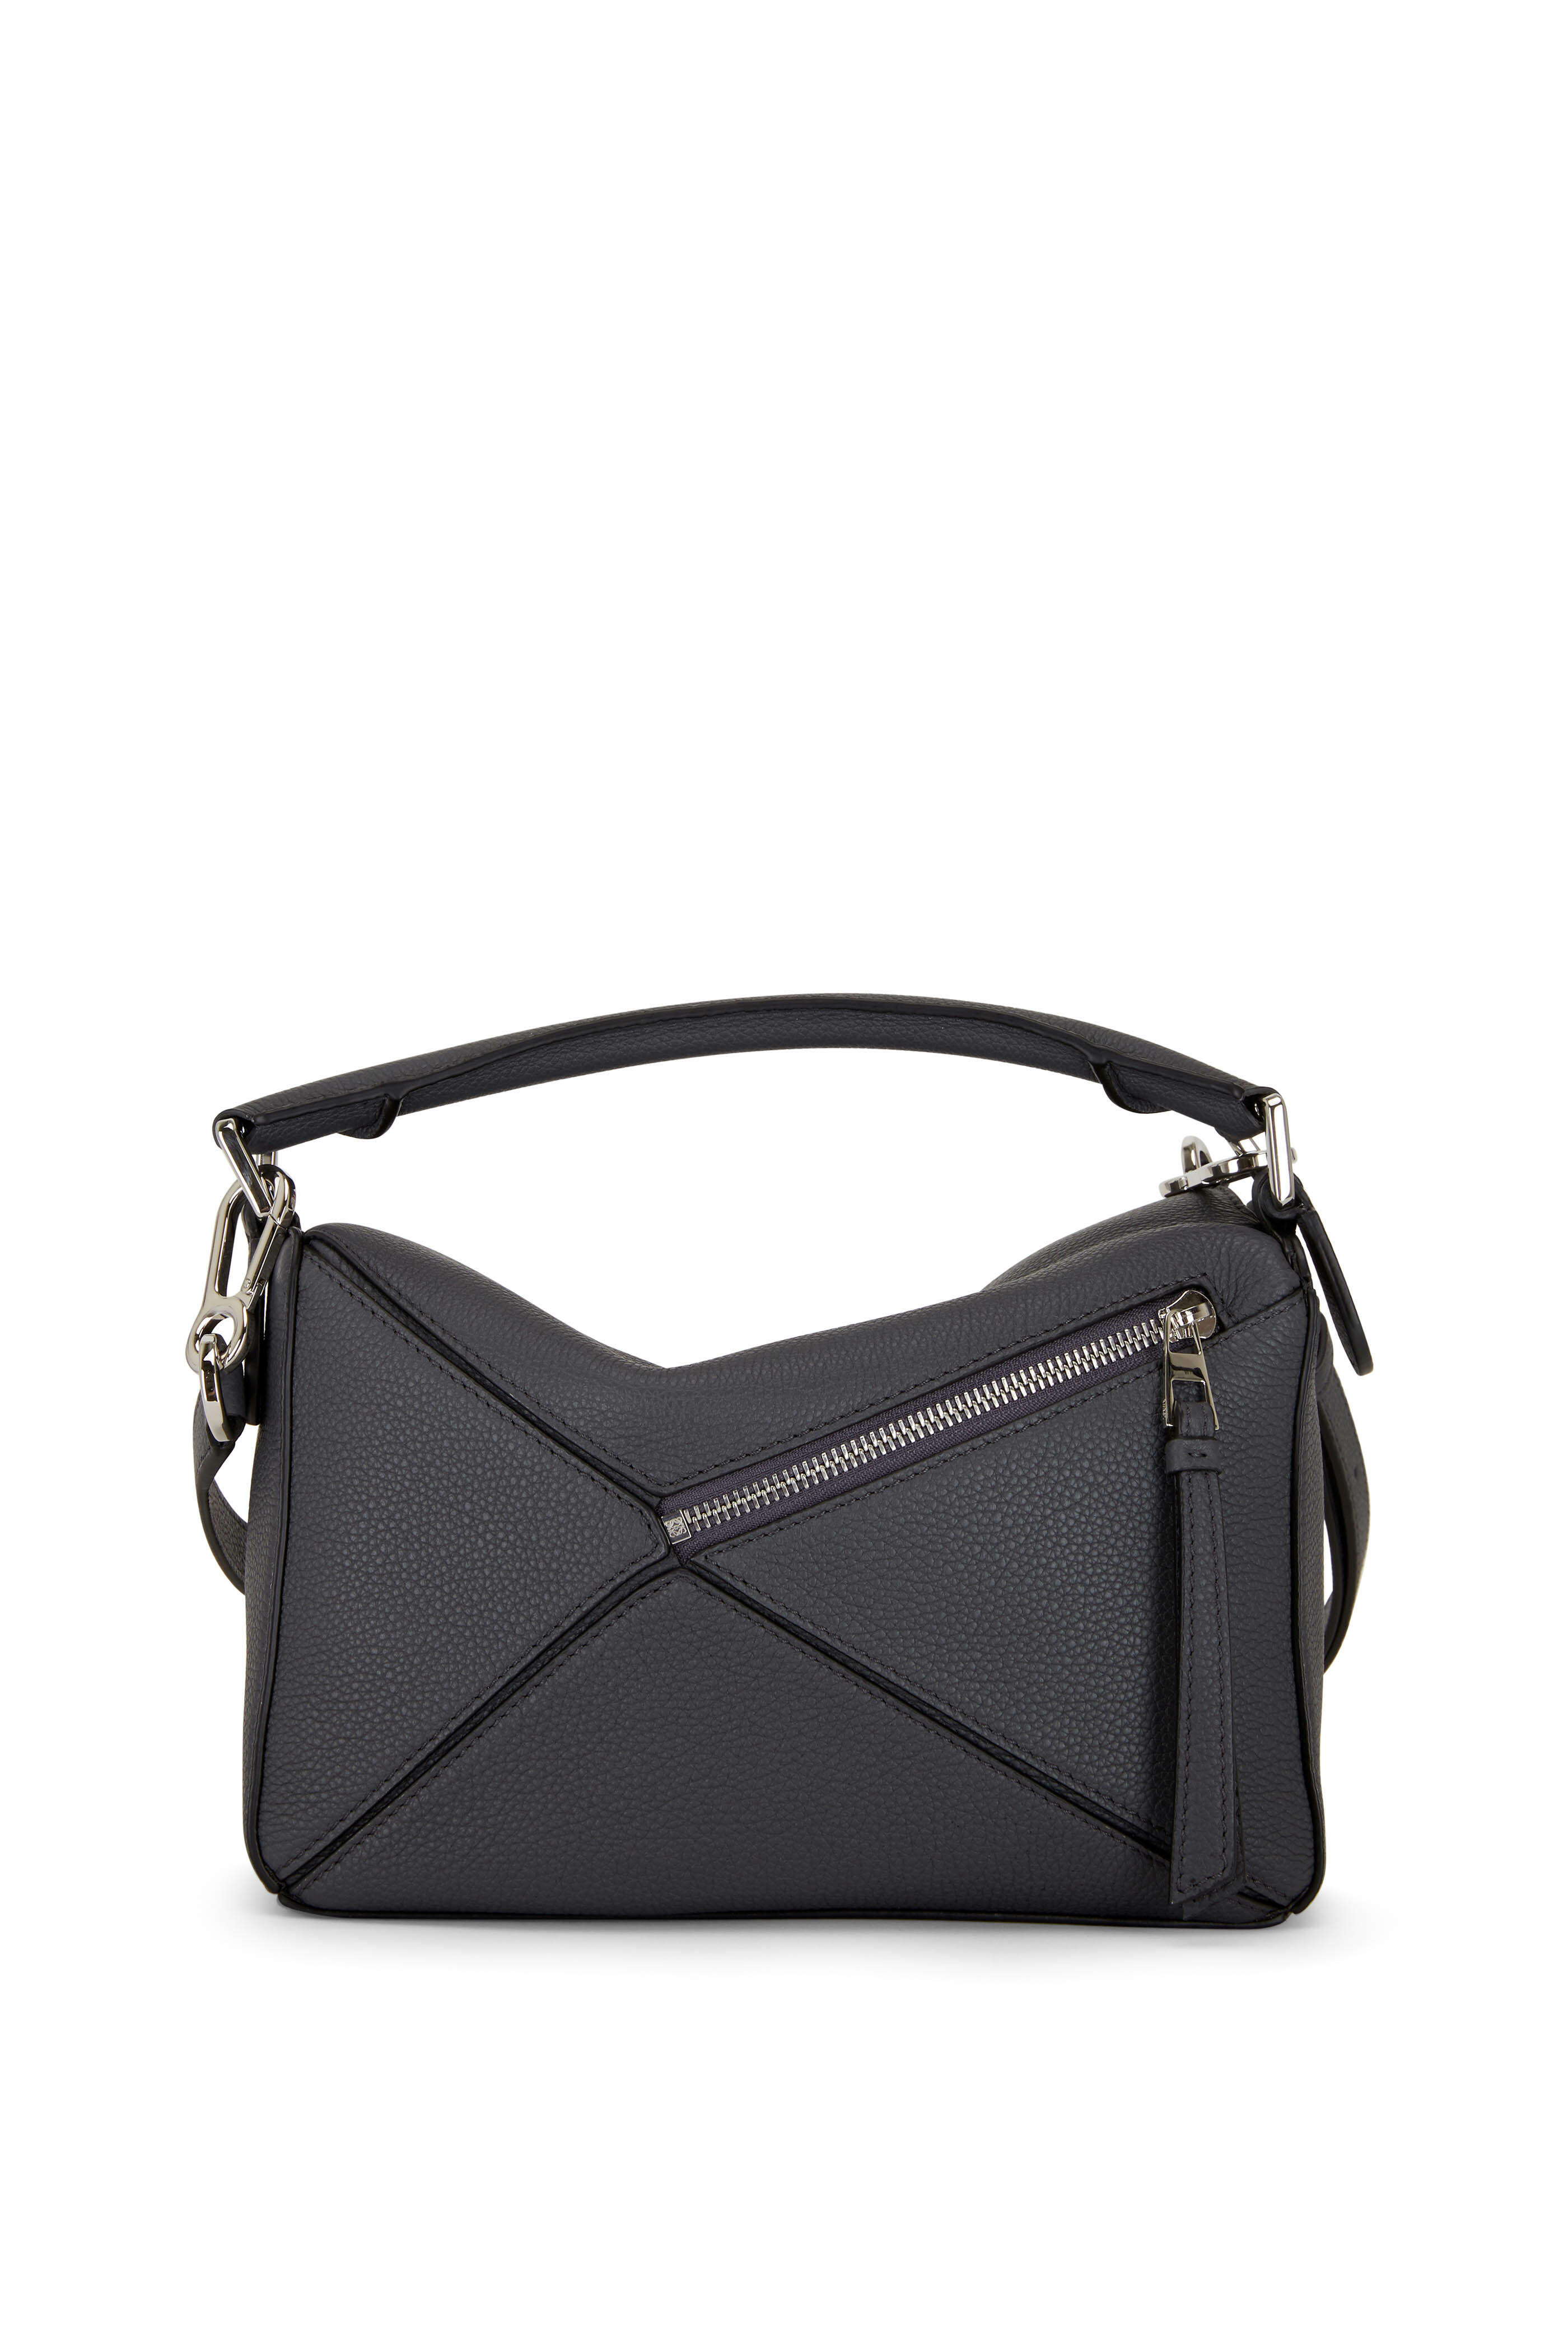 LOEWE Small Leather Puzzle Top-Handle Bag